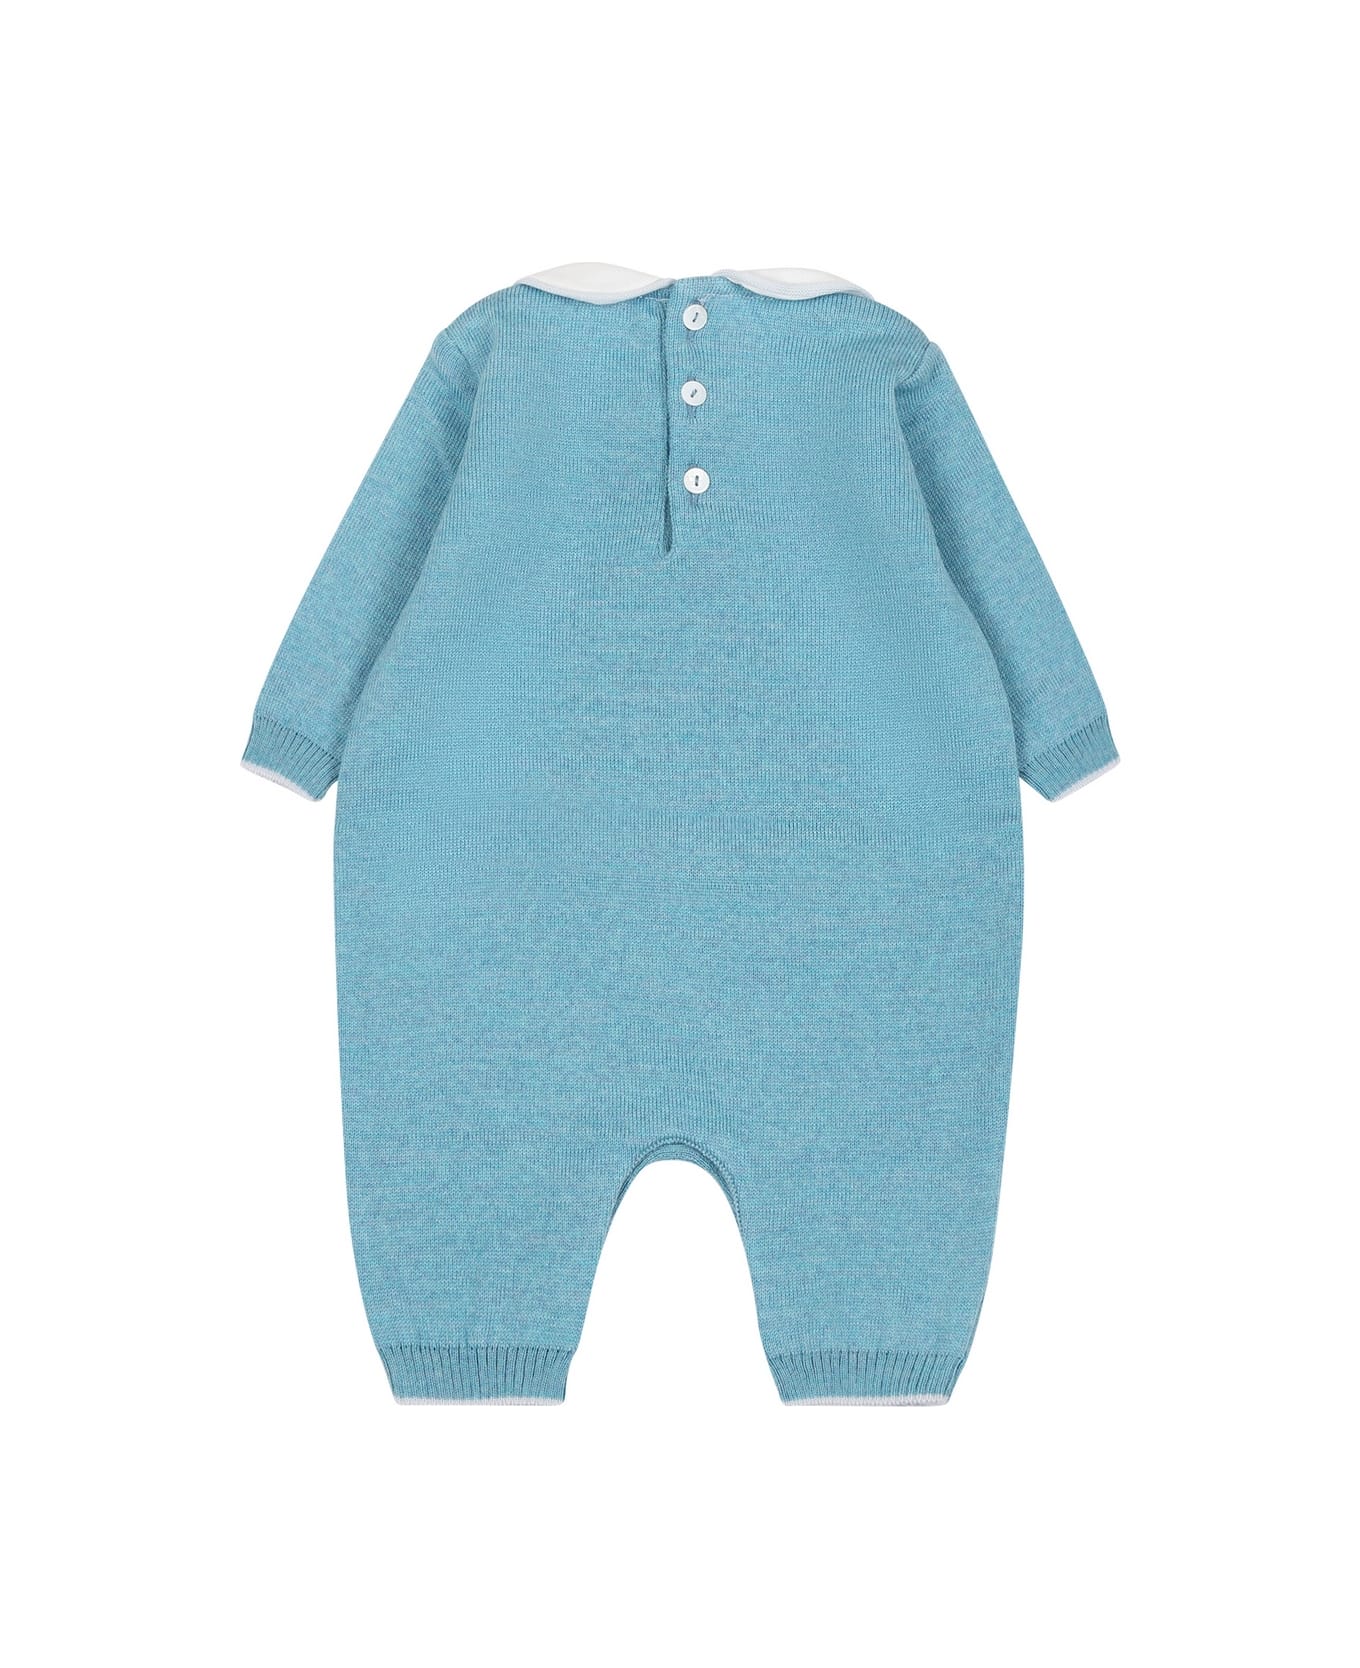 Little Bear Light Blue Babygrown For Baby Boy With Embroidered "prince" Writing - Light Blue